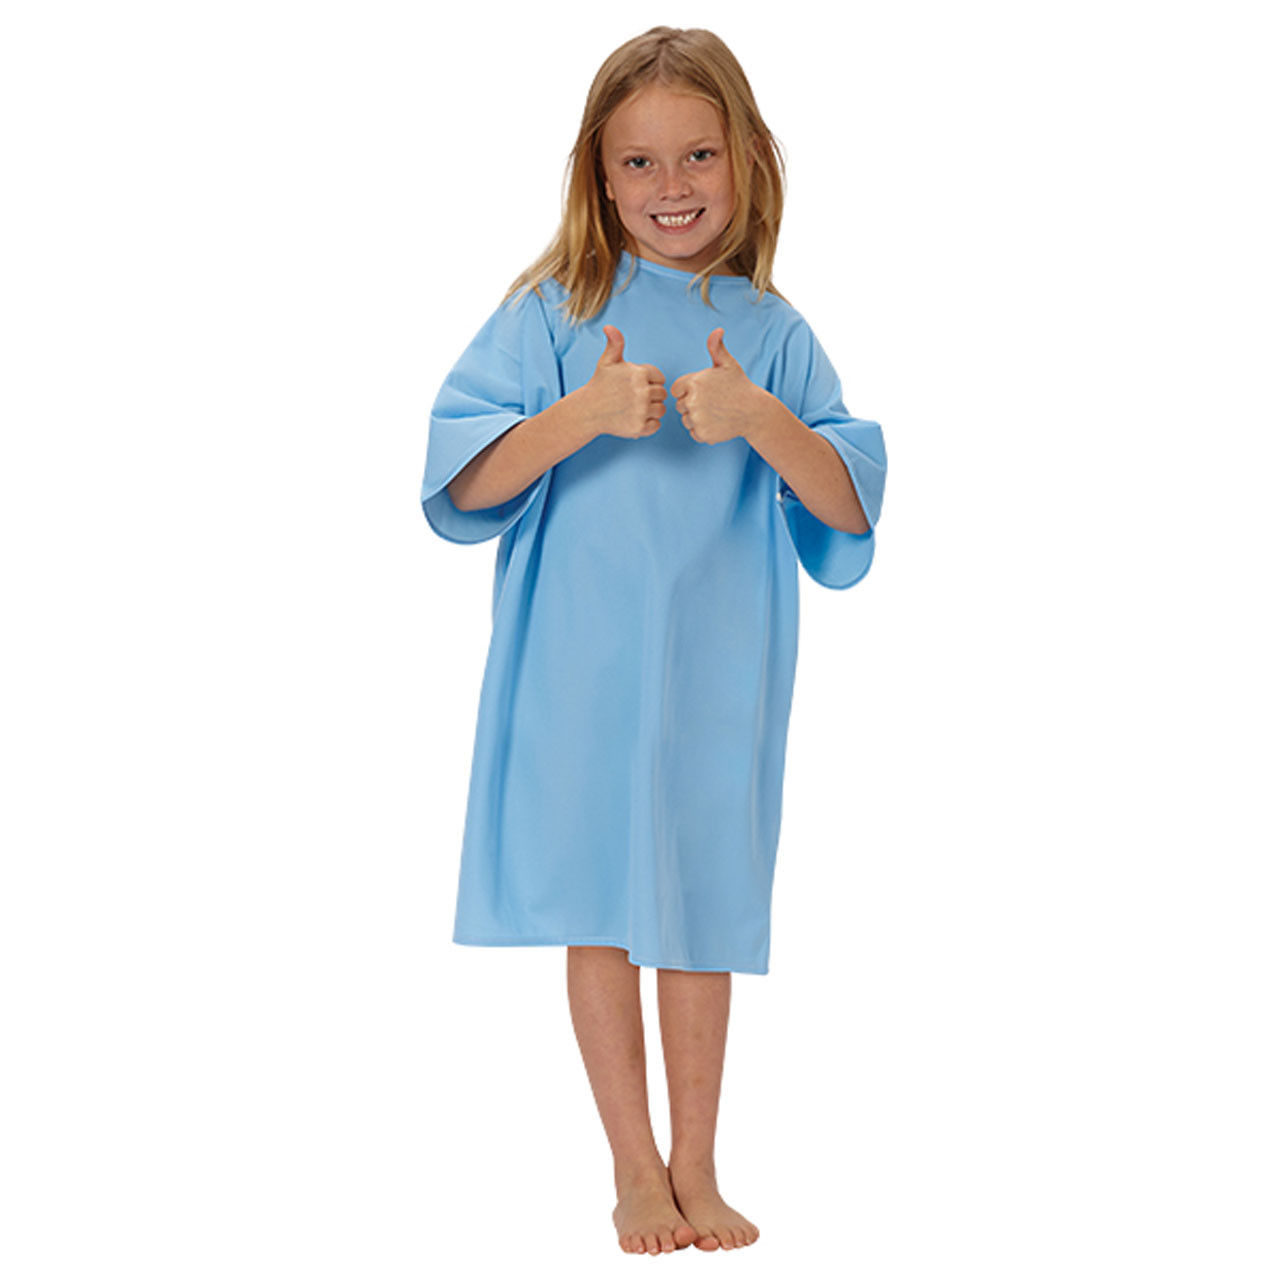 Are these children's hospital gowns suitable for extended stays?